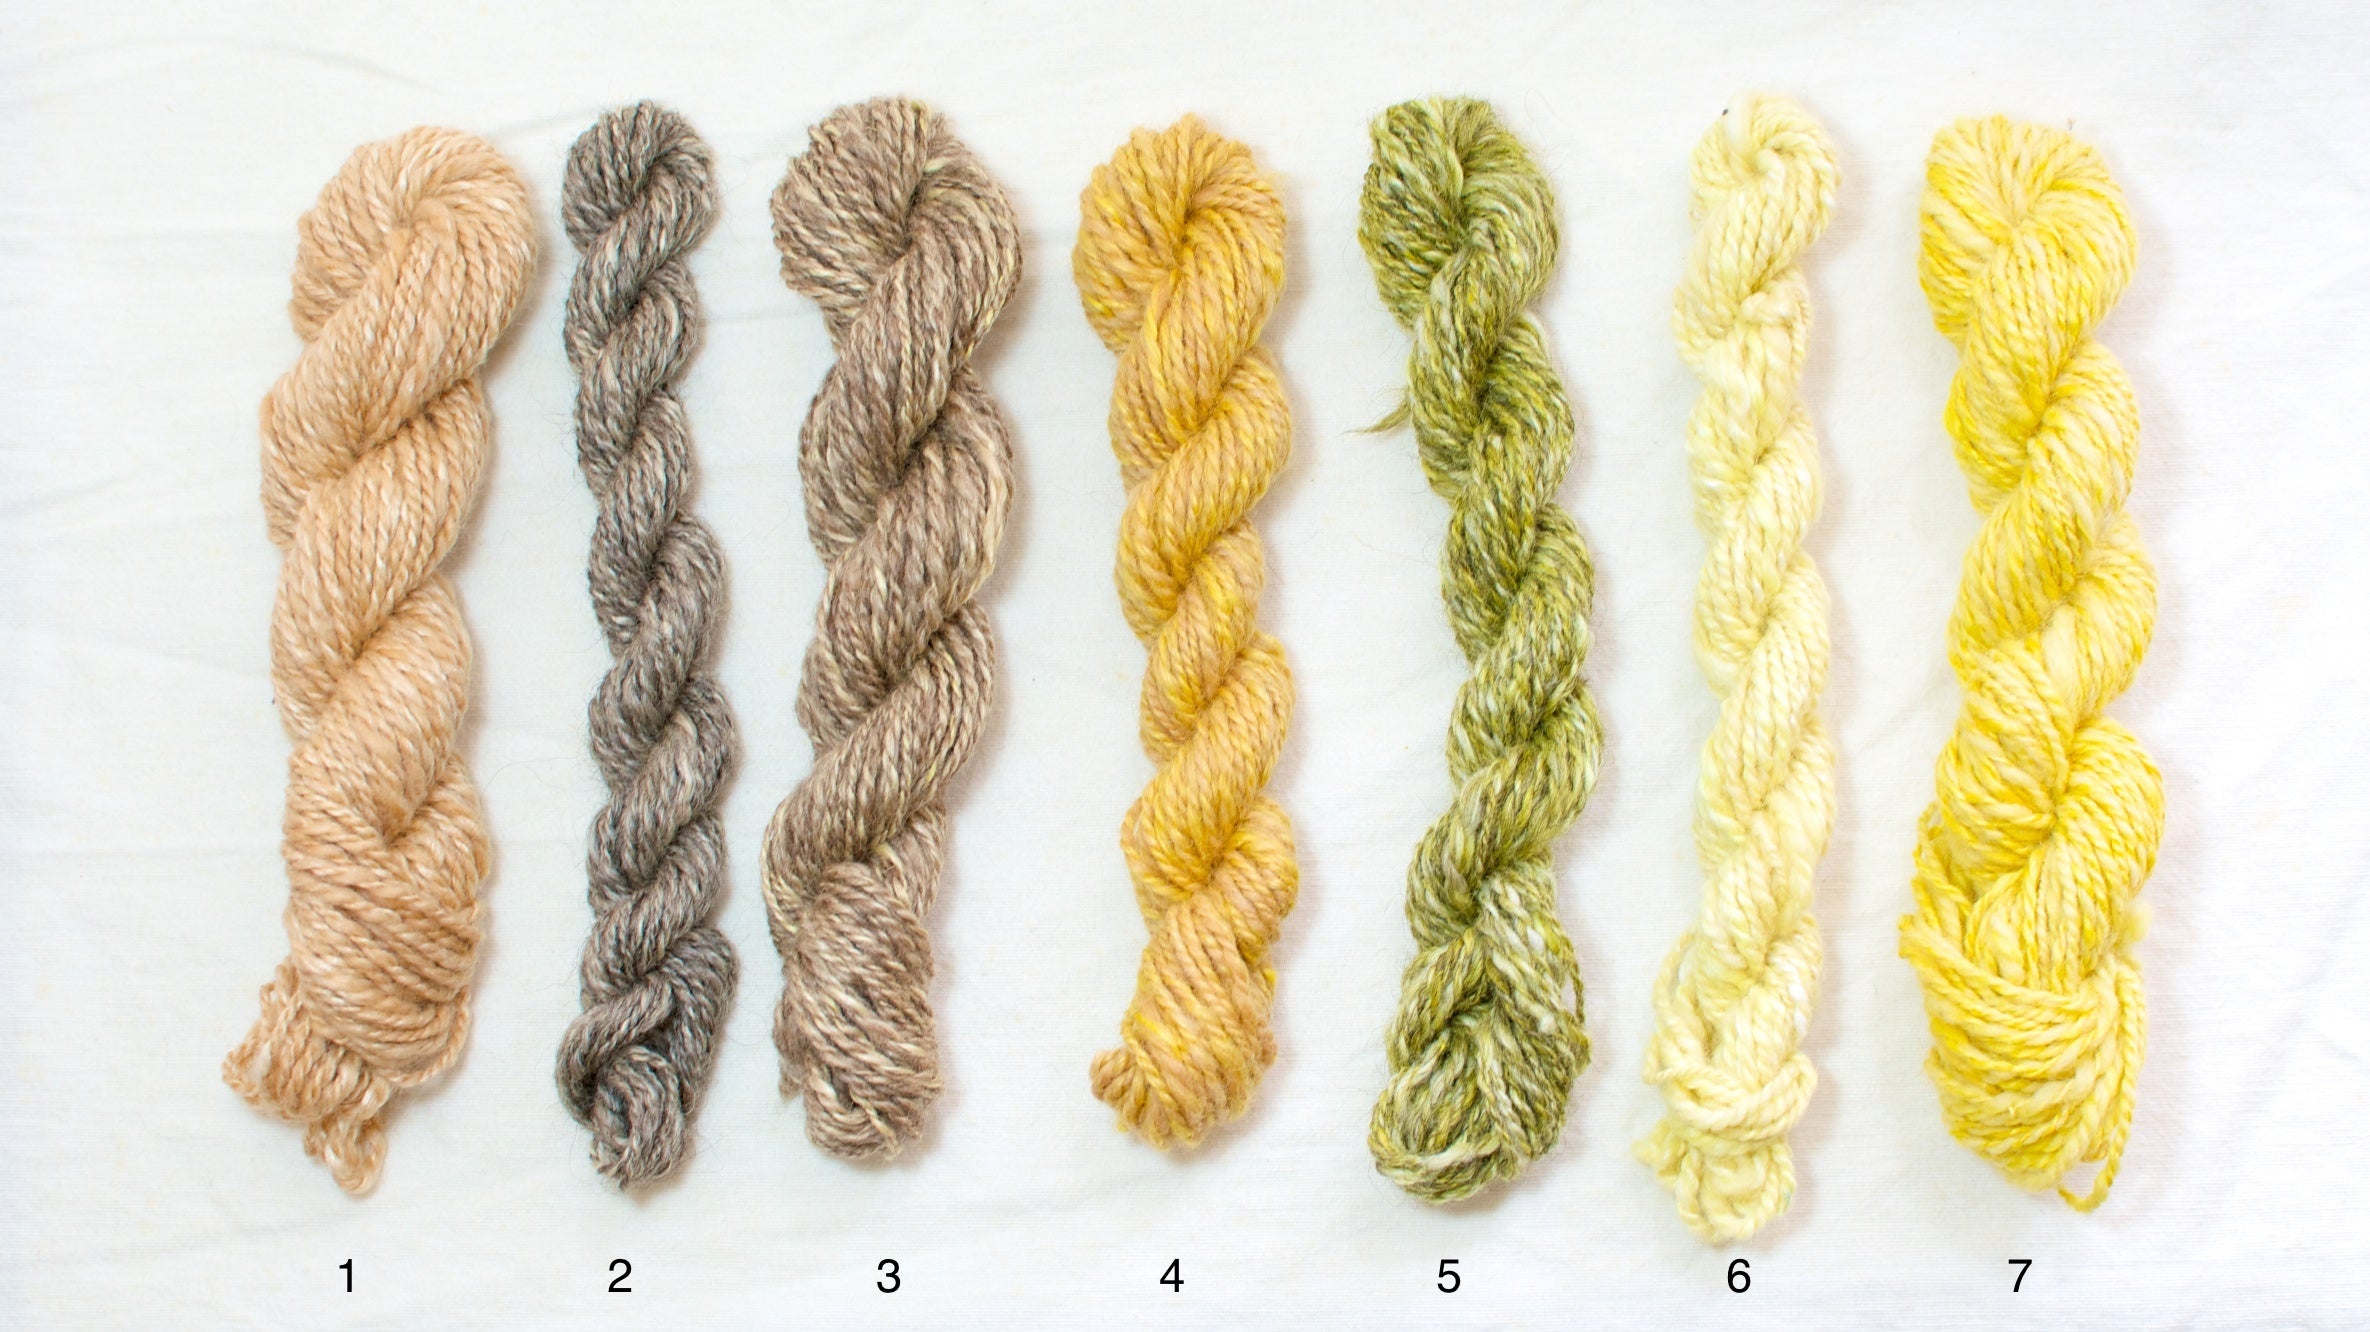 On plant dyes and fibres